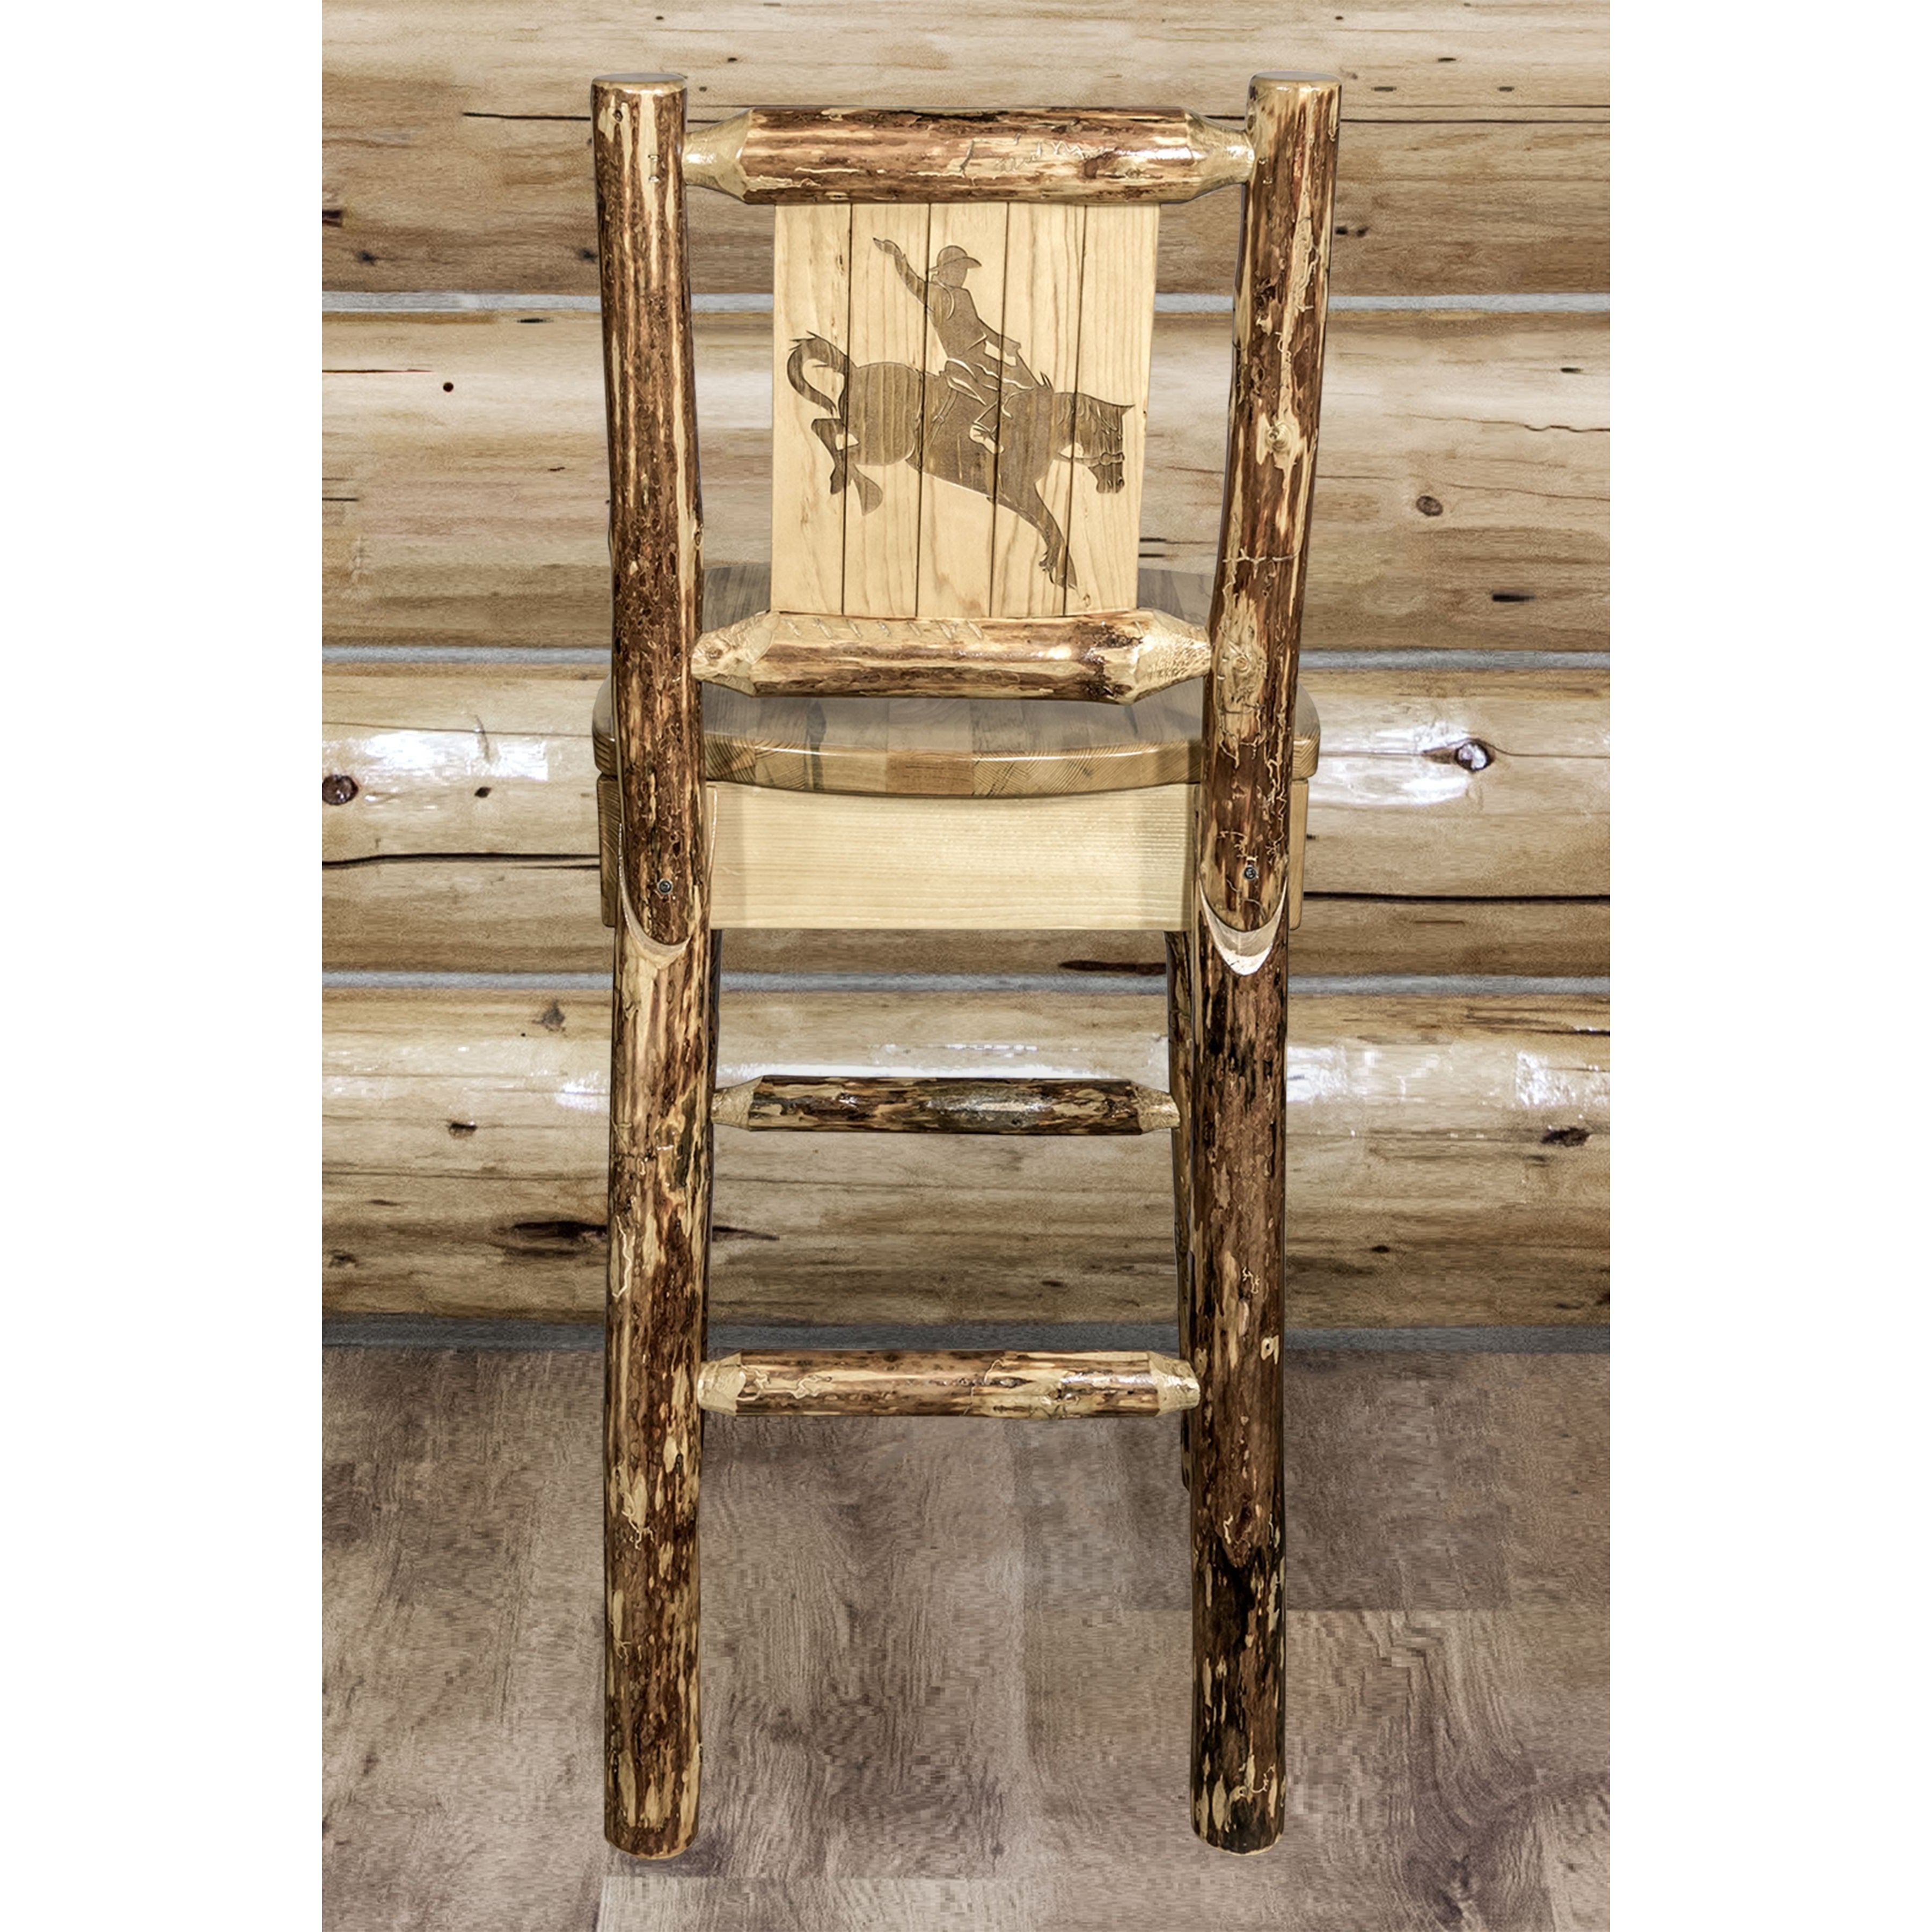 Montana Glacier Country MWGCBSWNRLZBRONC Barstool With Back and Laser Engraved Bronc Design